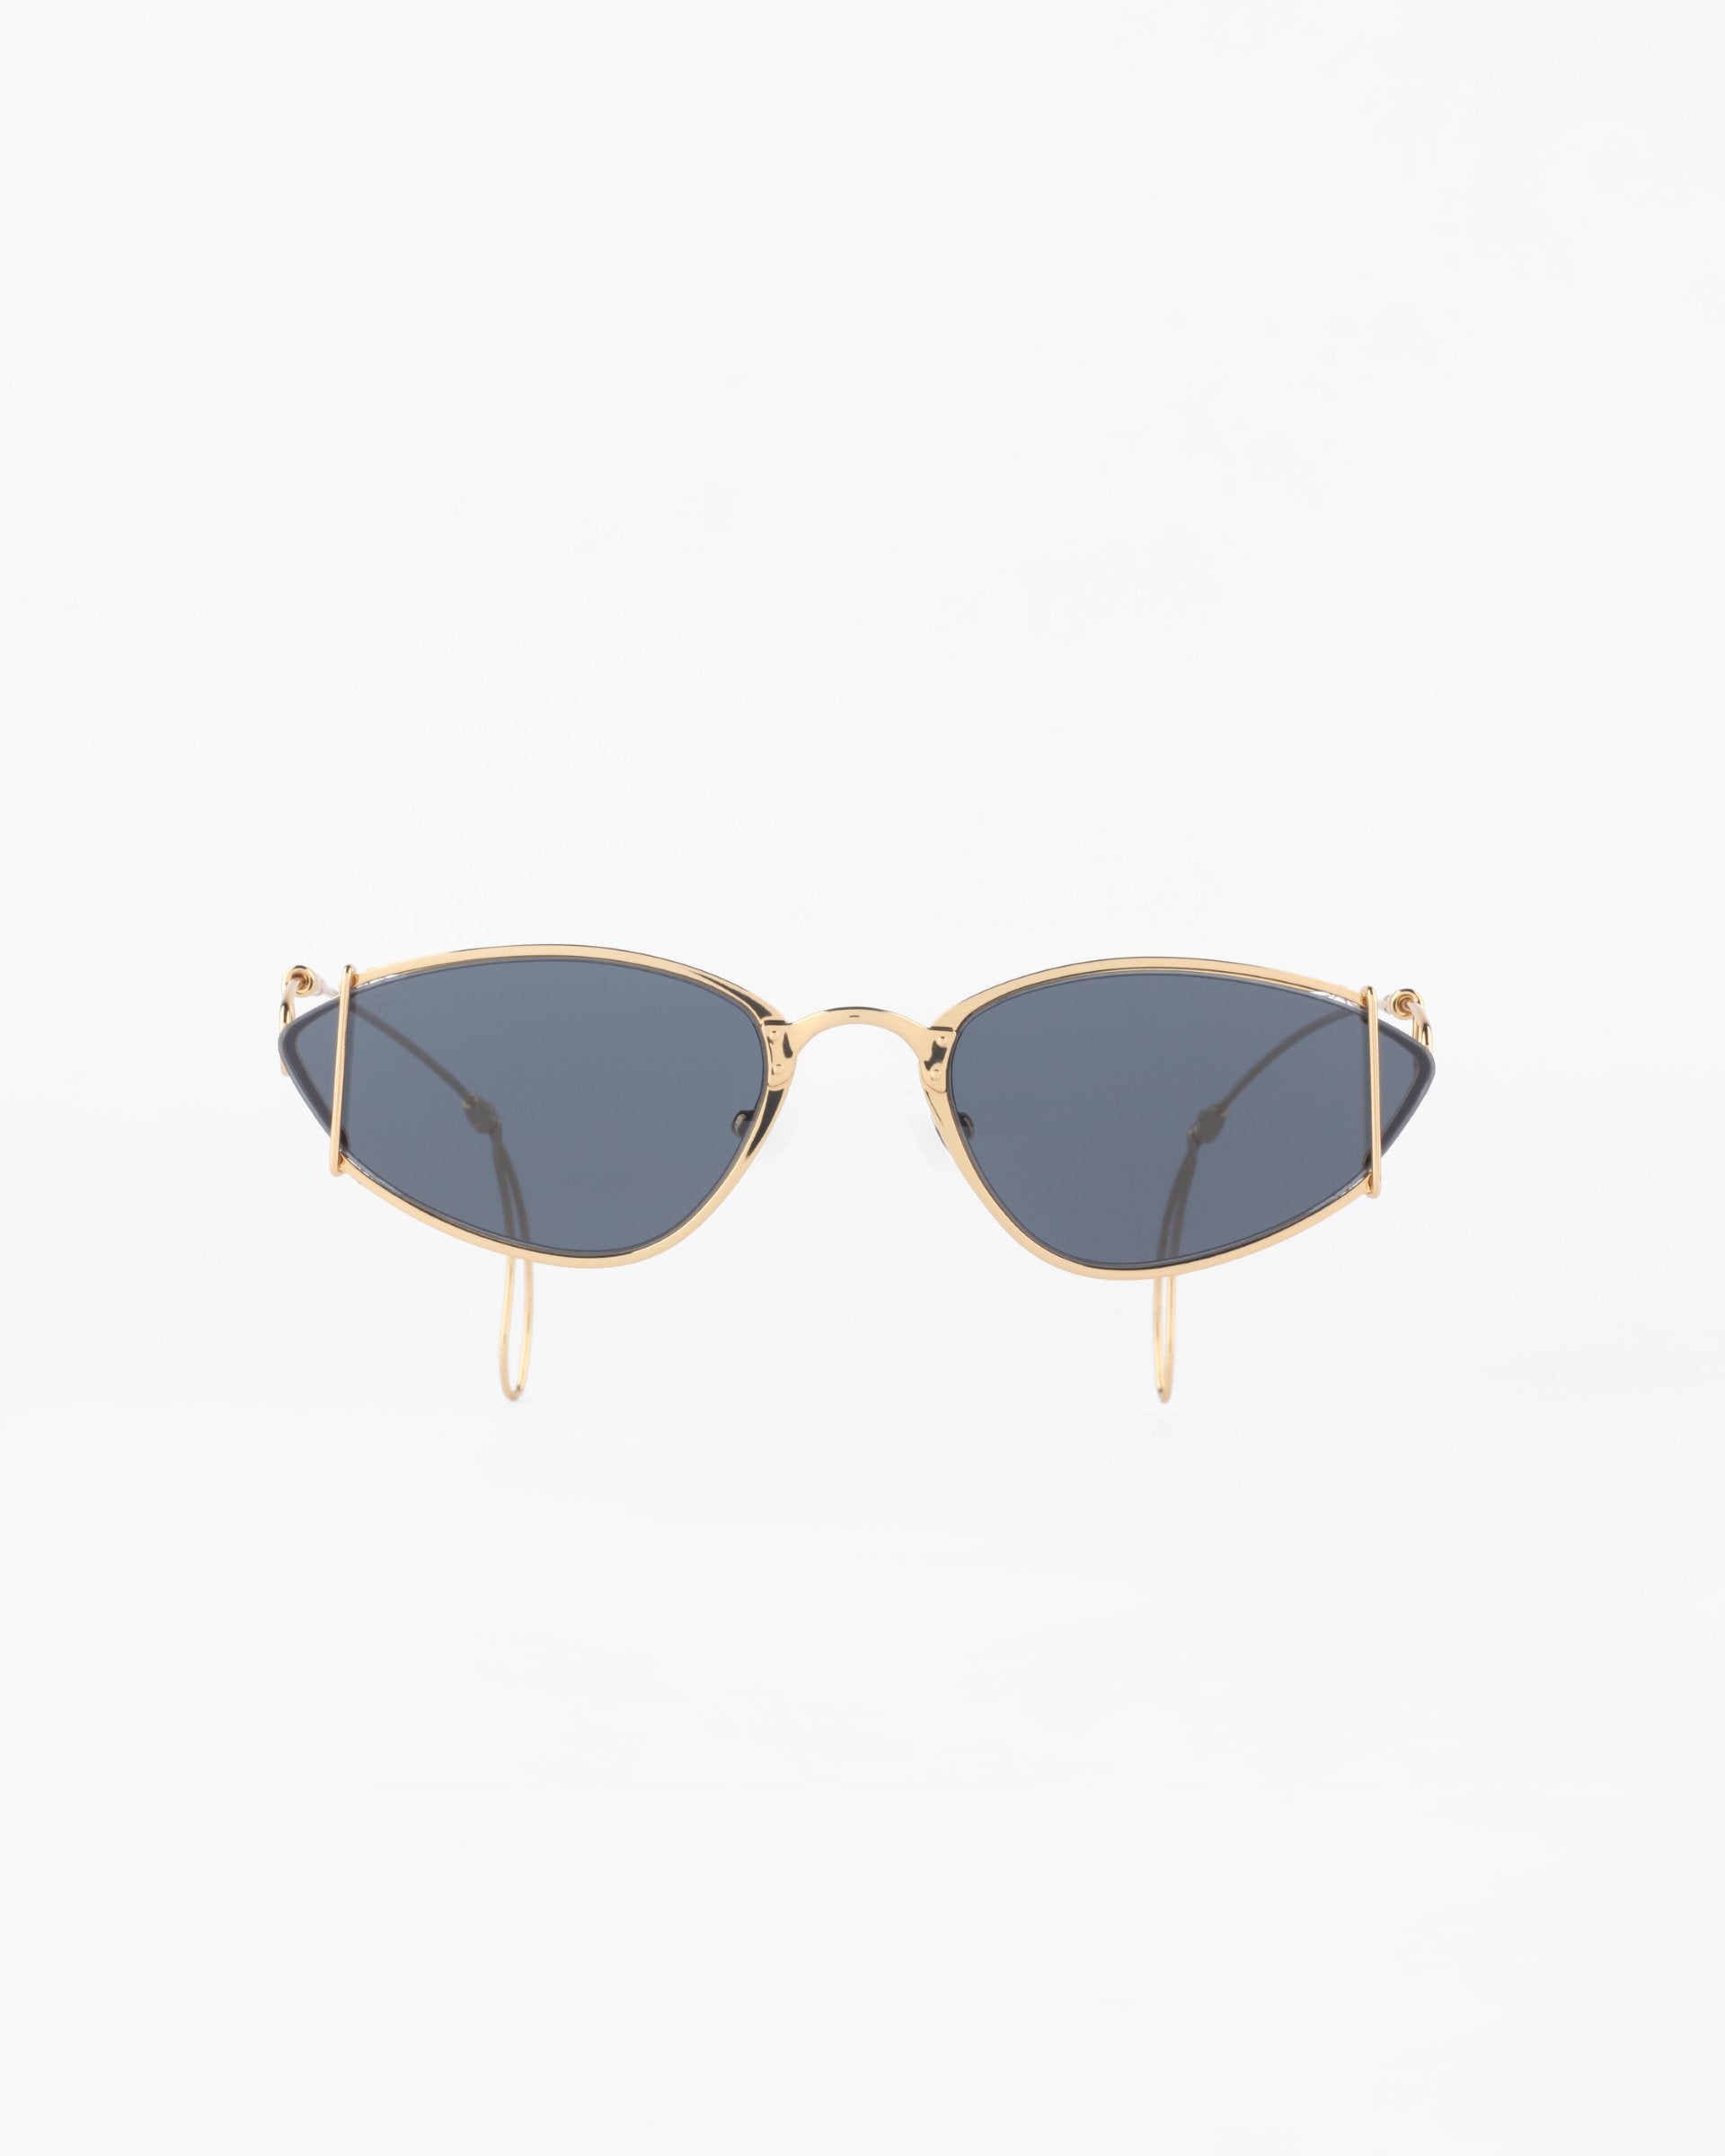 A pair of For Art's Sake® Ornate sunglasses with an 18-karat gold-plated metal frame and dark blue-tinted, ultra-lightweight nylon lenses. The design features a sleek, minimalist look with thin, curved arms and a slight cat-eye shape. Offering 100% UVA & UVB protection, the background is plain white.